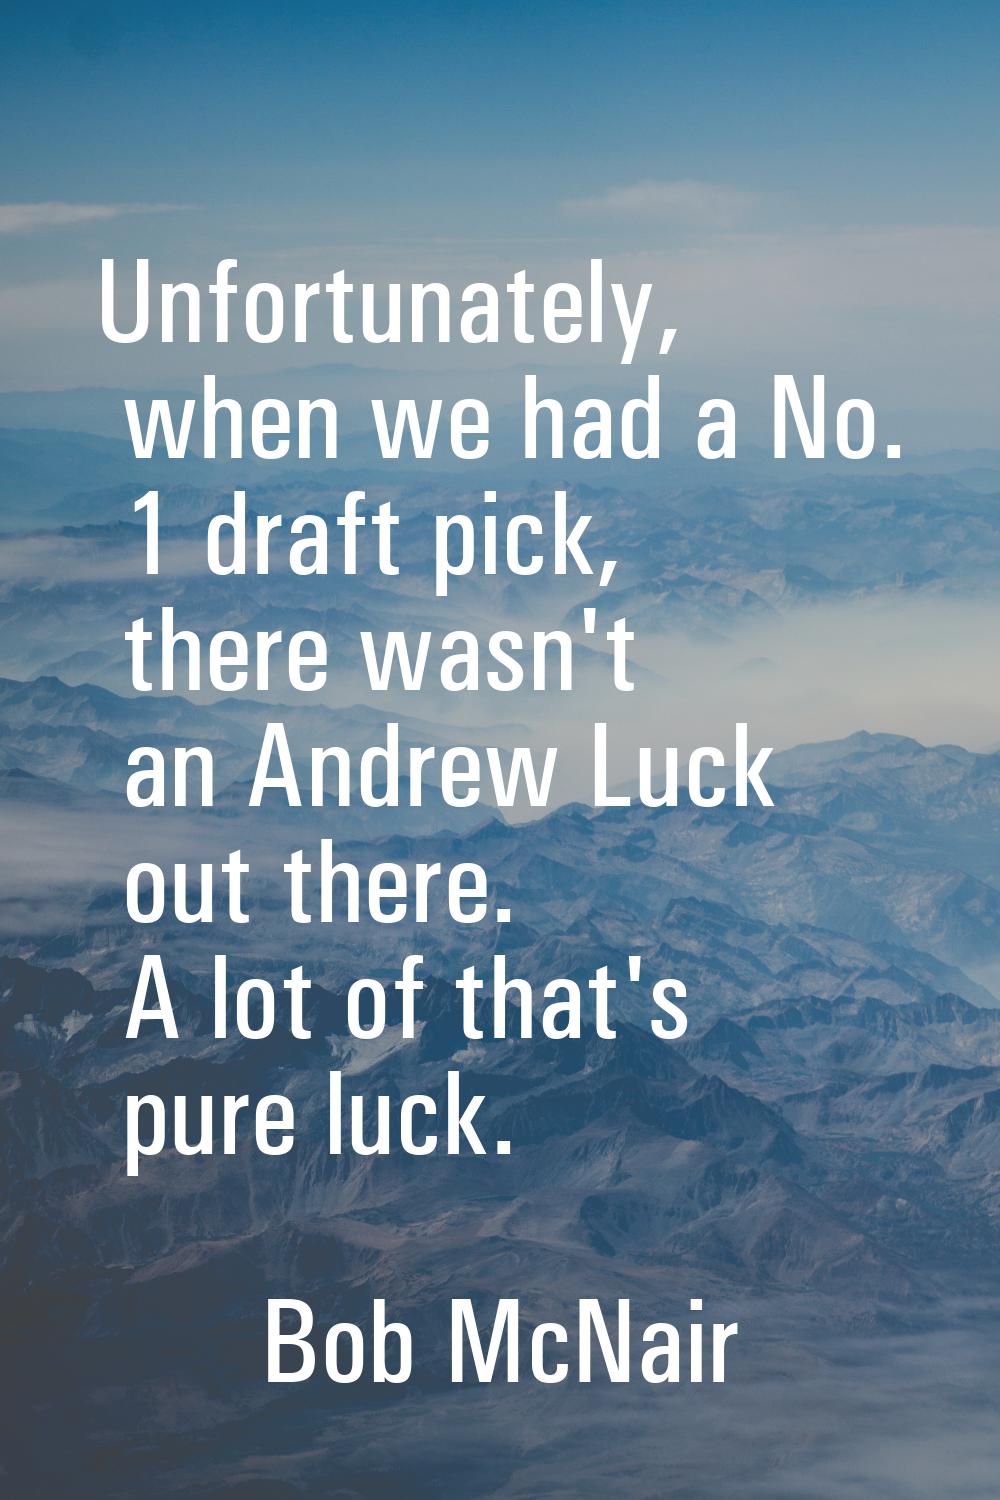 Unfortunately, when we had a No. 1 draft pick, there wasn't an Andrew Luck out there. A lot of that